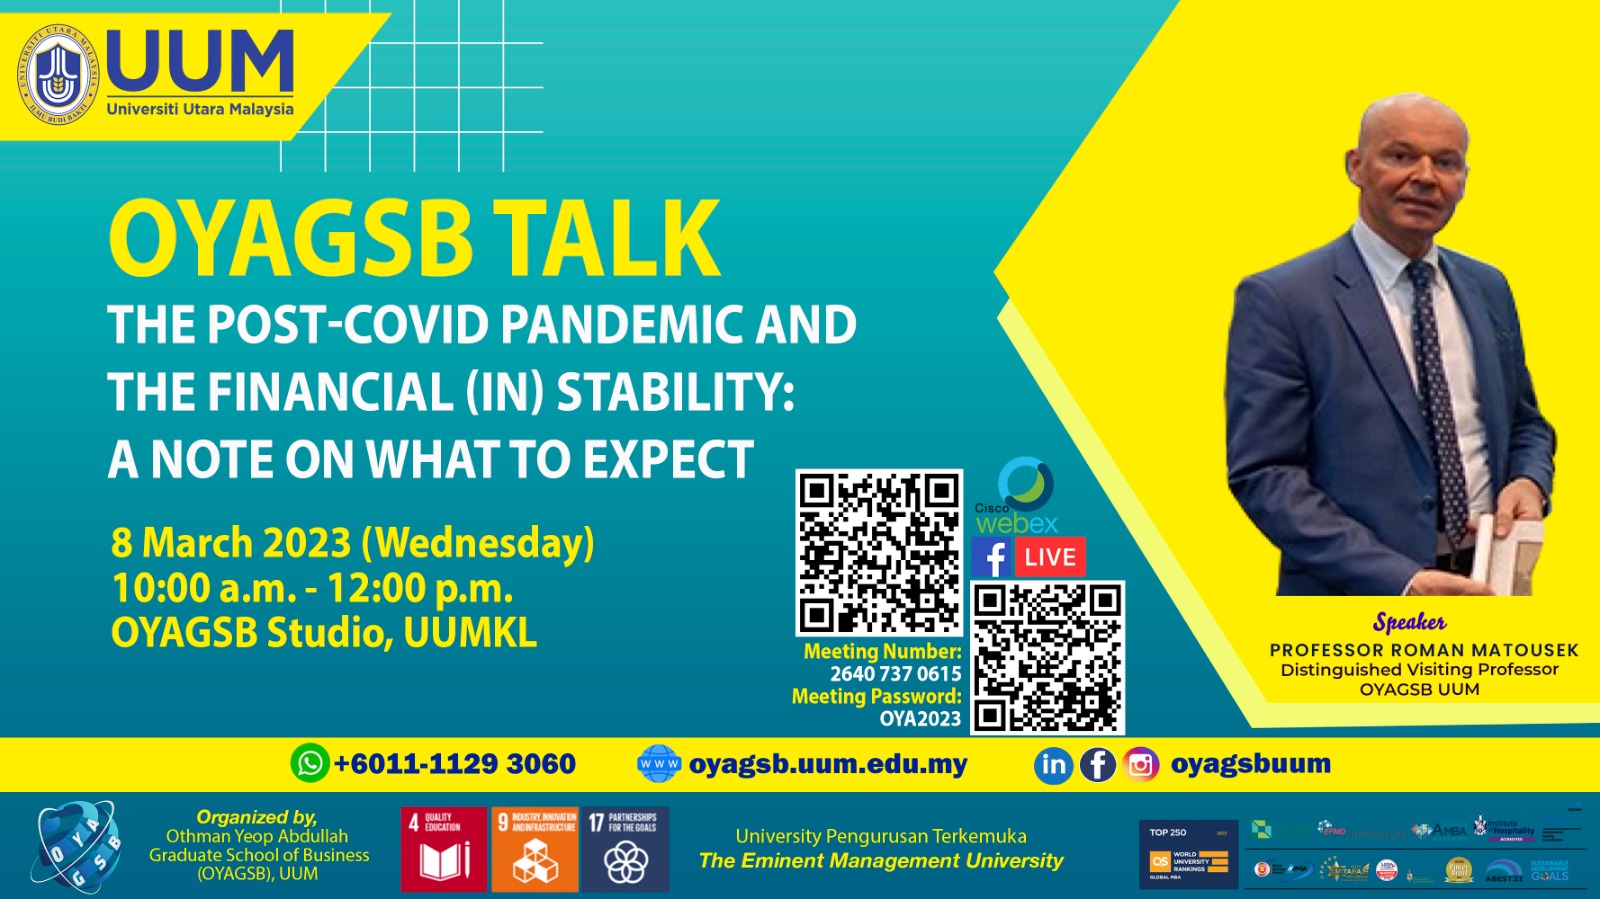 OYAGSB Talk: The Post-COVID Pandemic and the Financial (in) Stability: A Note on What to Expect